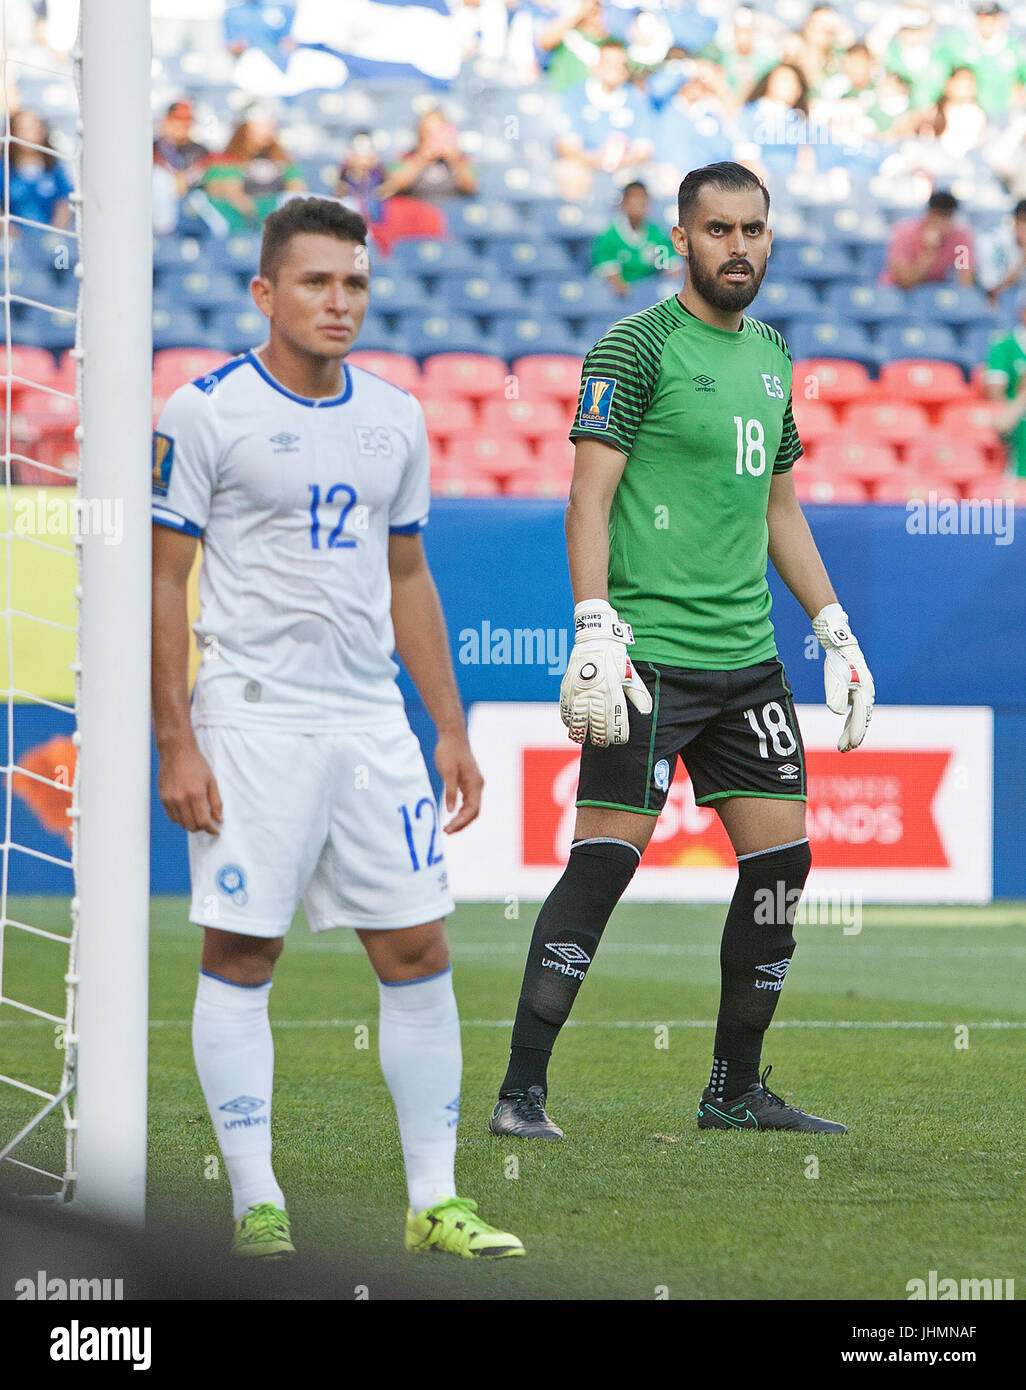 Denver, Colorado, USA. 13th July, 2017. El Salvador G DERBY CARRILLO, right, looks on during a corner kick attempt with team mate MF NARCISO ORELLANA, left, during the 1st. Half at Sports Authority Field at Mile High during the CONCACAF Gold Cup tournament Thursday night. El Salvador beats Curacao 2-0. Credit: Hector Acevedo/ZUMA Wire/Alamy Live News Stock Photo